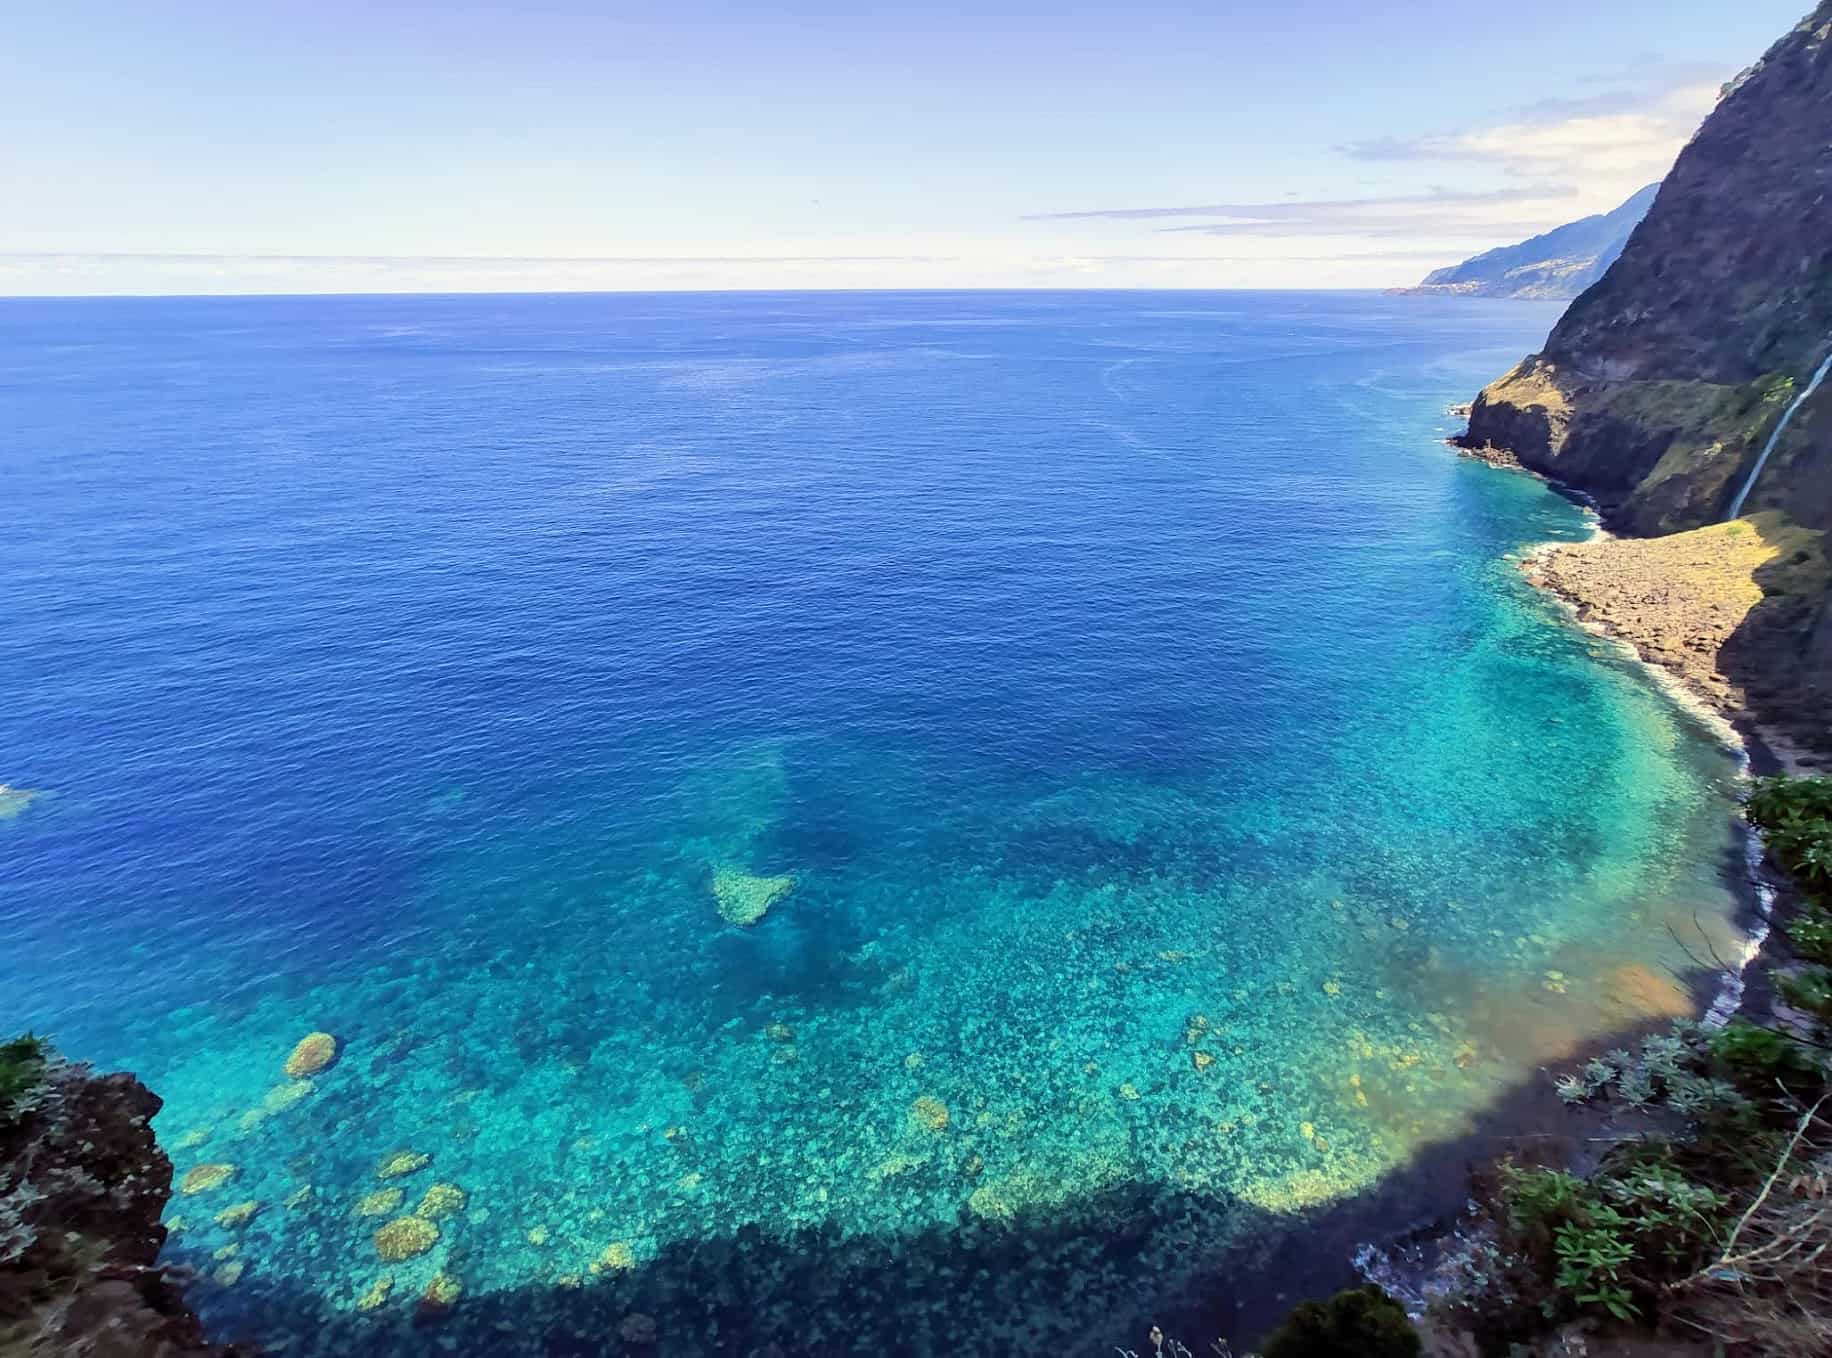 Madeira Travel Guide: One of the views with blue ocean and cliff in Madeira